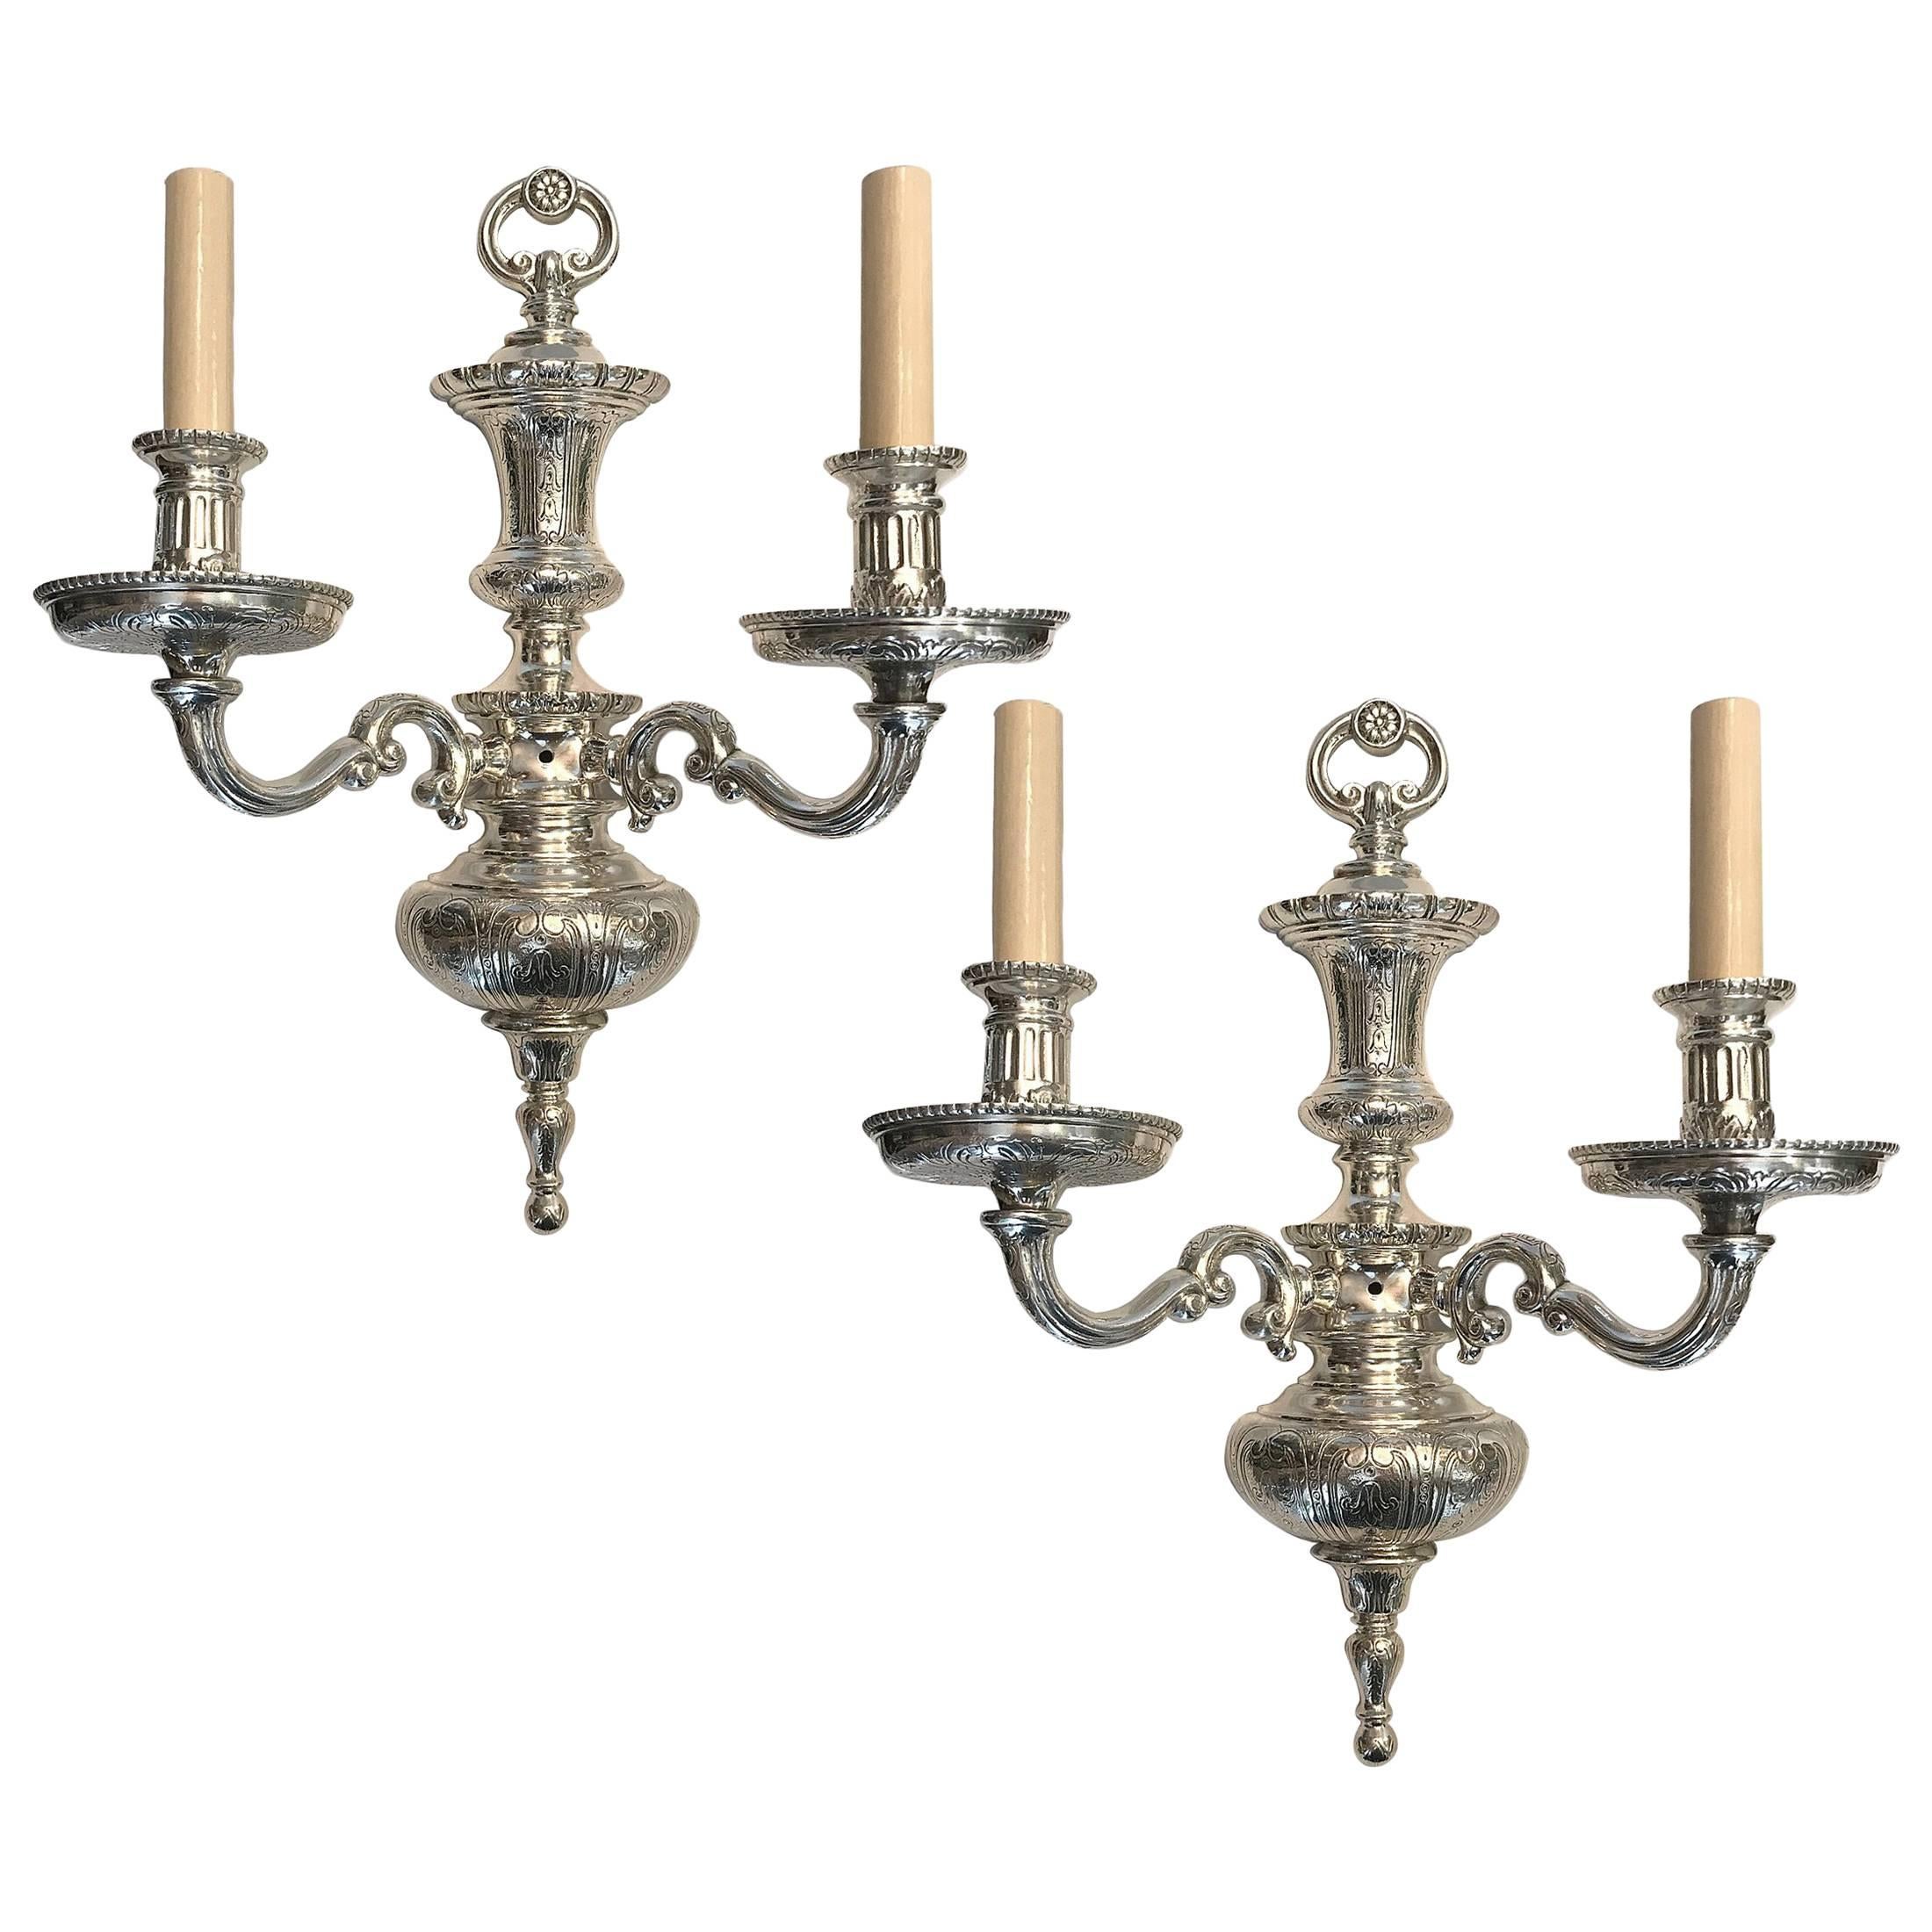 Pair of Neoclassic Silver Plated Sconces